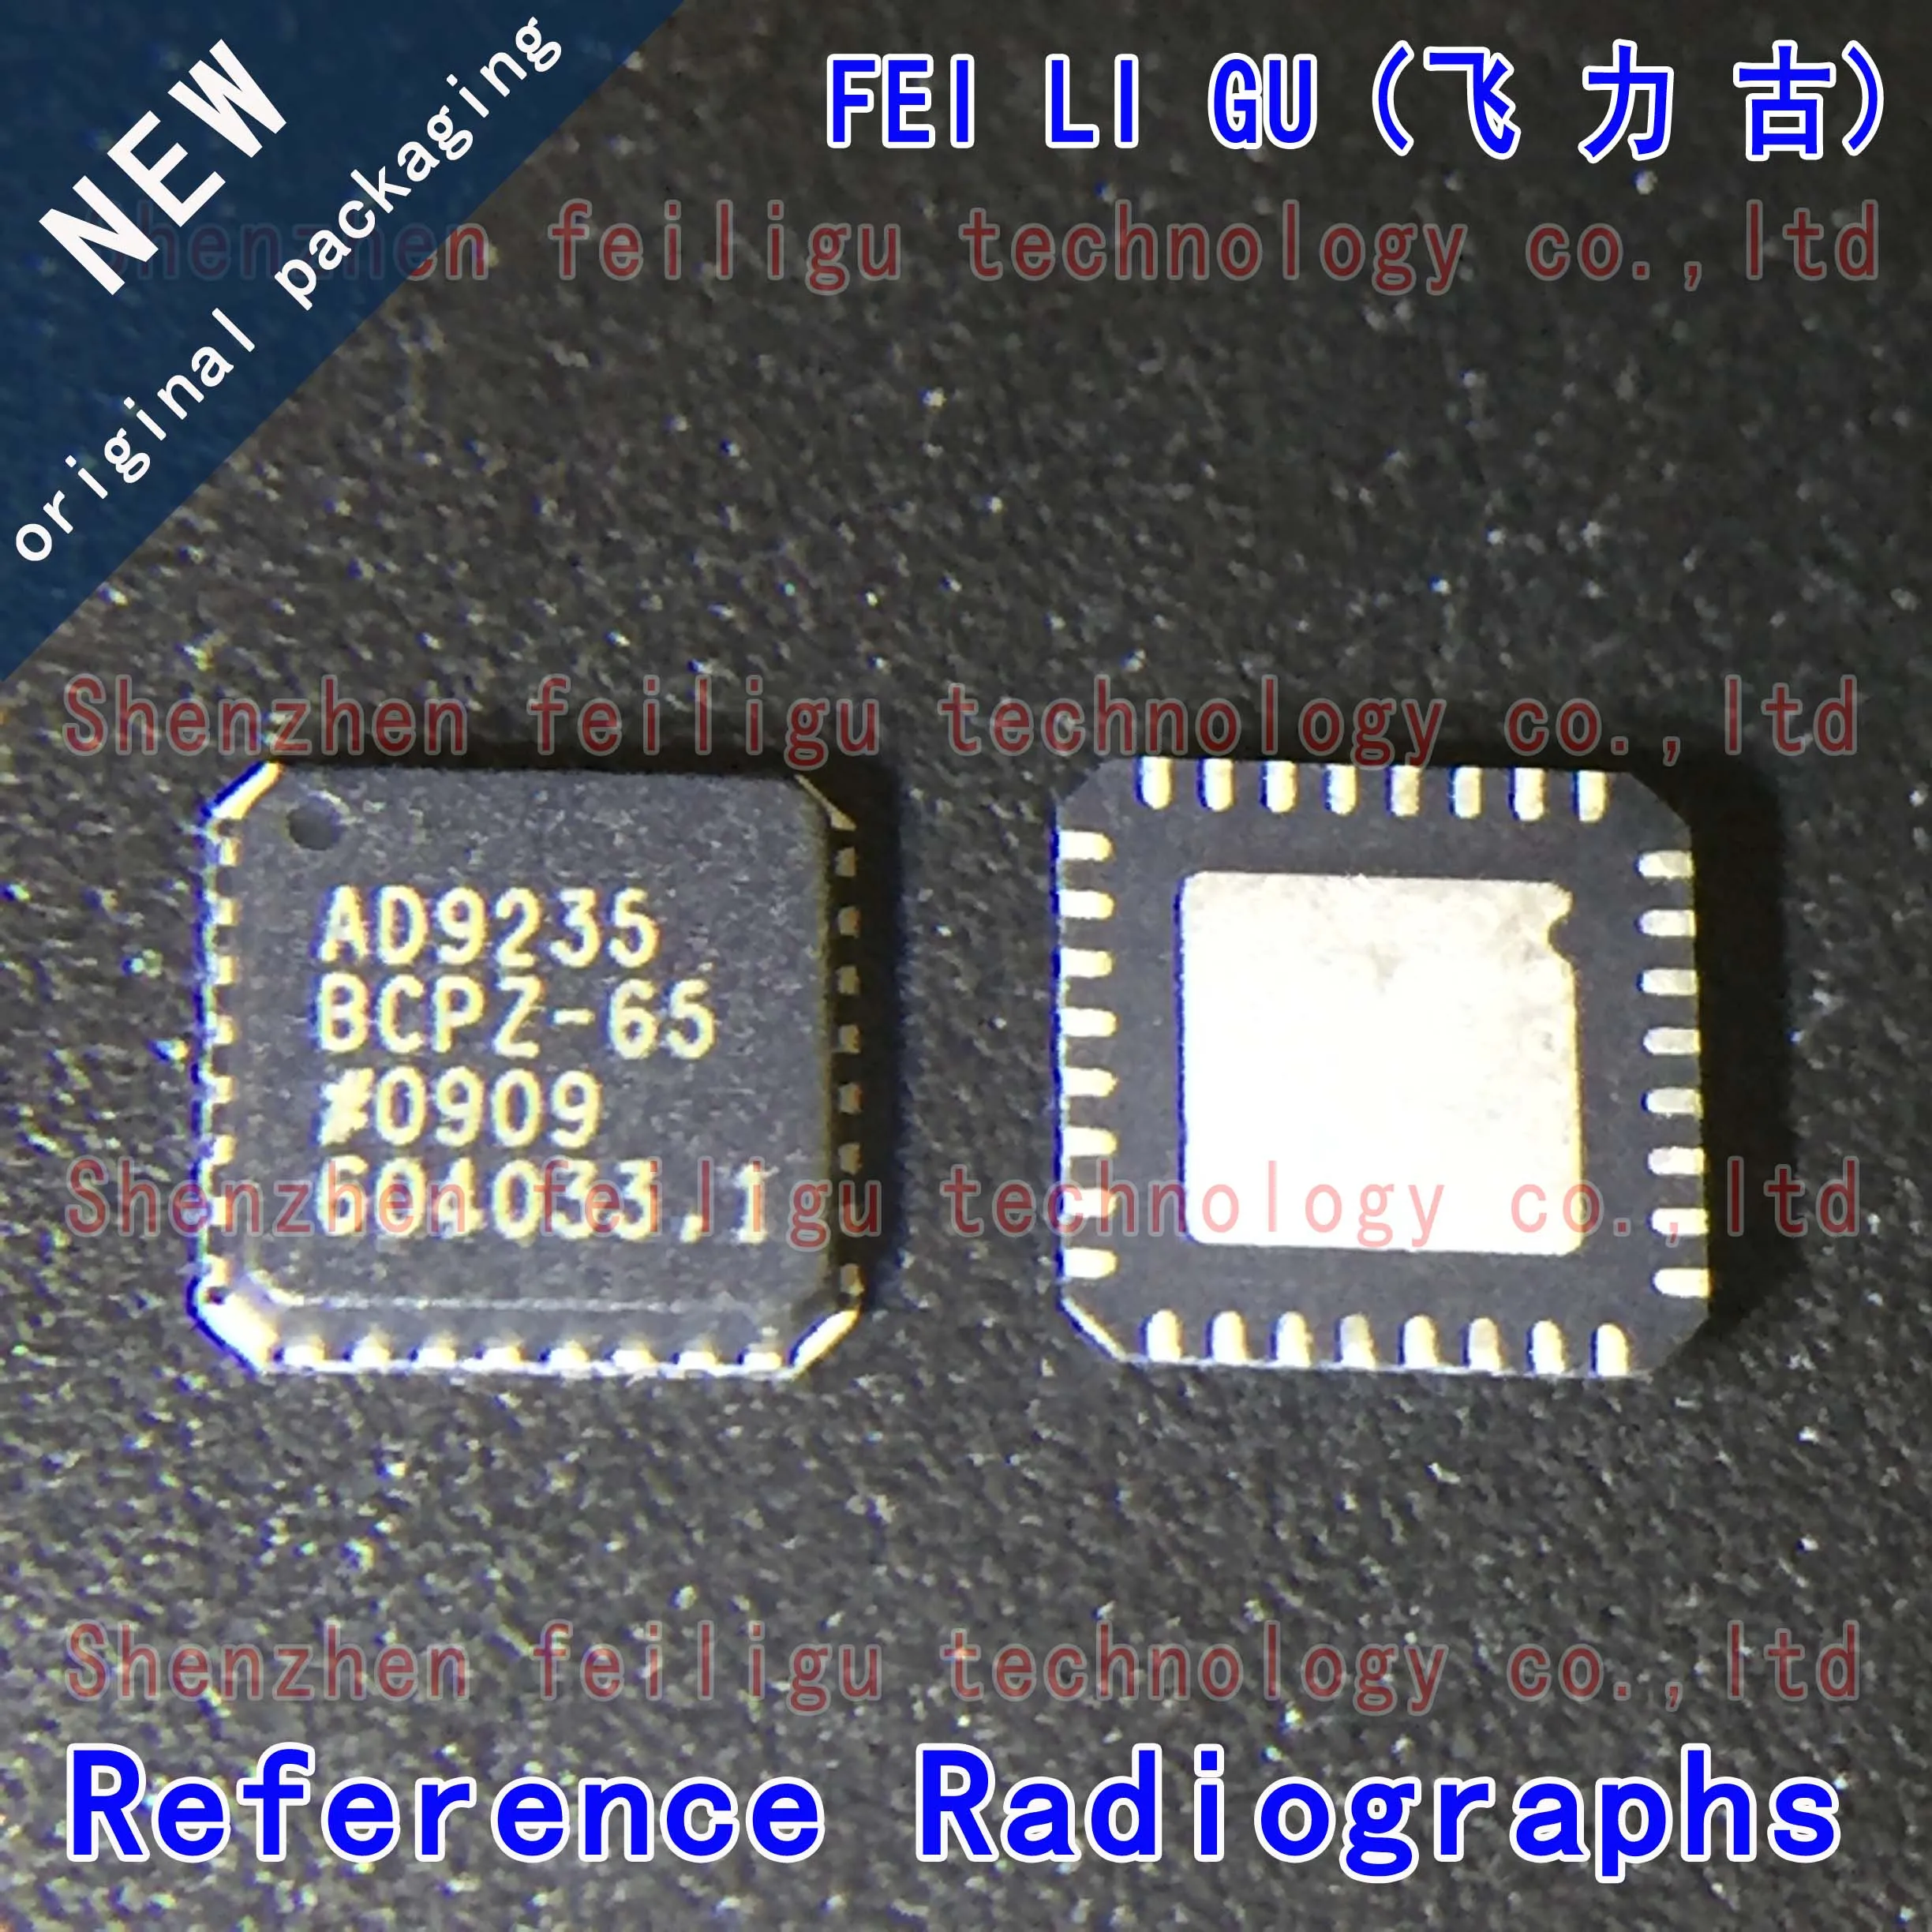 

New Original AD9235BCPZ-65 AD9235BCPZ AD9235 Package LFCSP32 12-Bit Analog-to-Digital Converter Chip Electronics